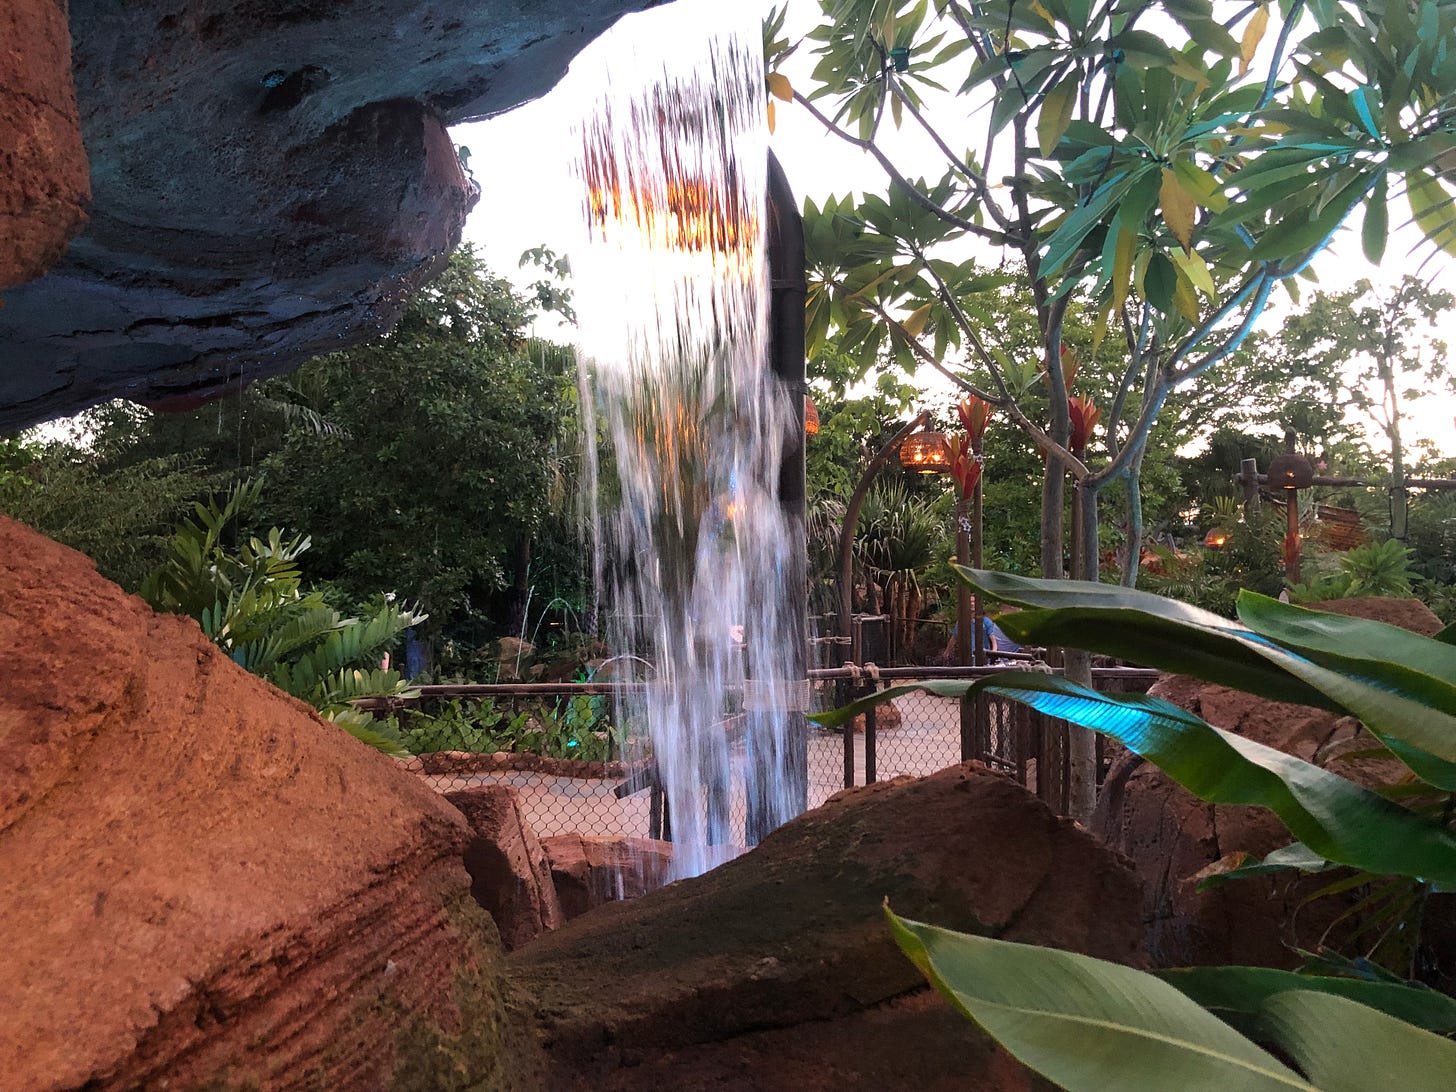 Waterfall at Epcot Journey of Water